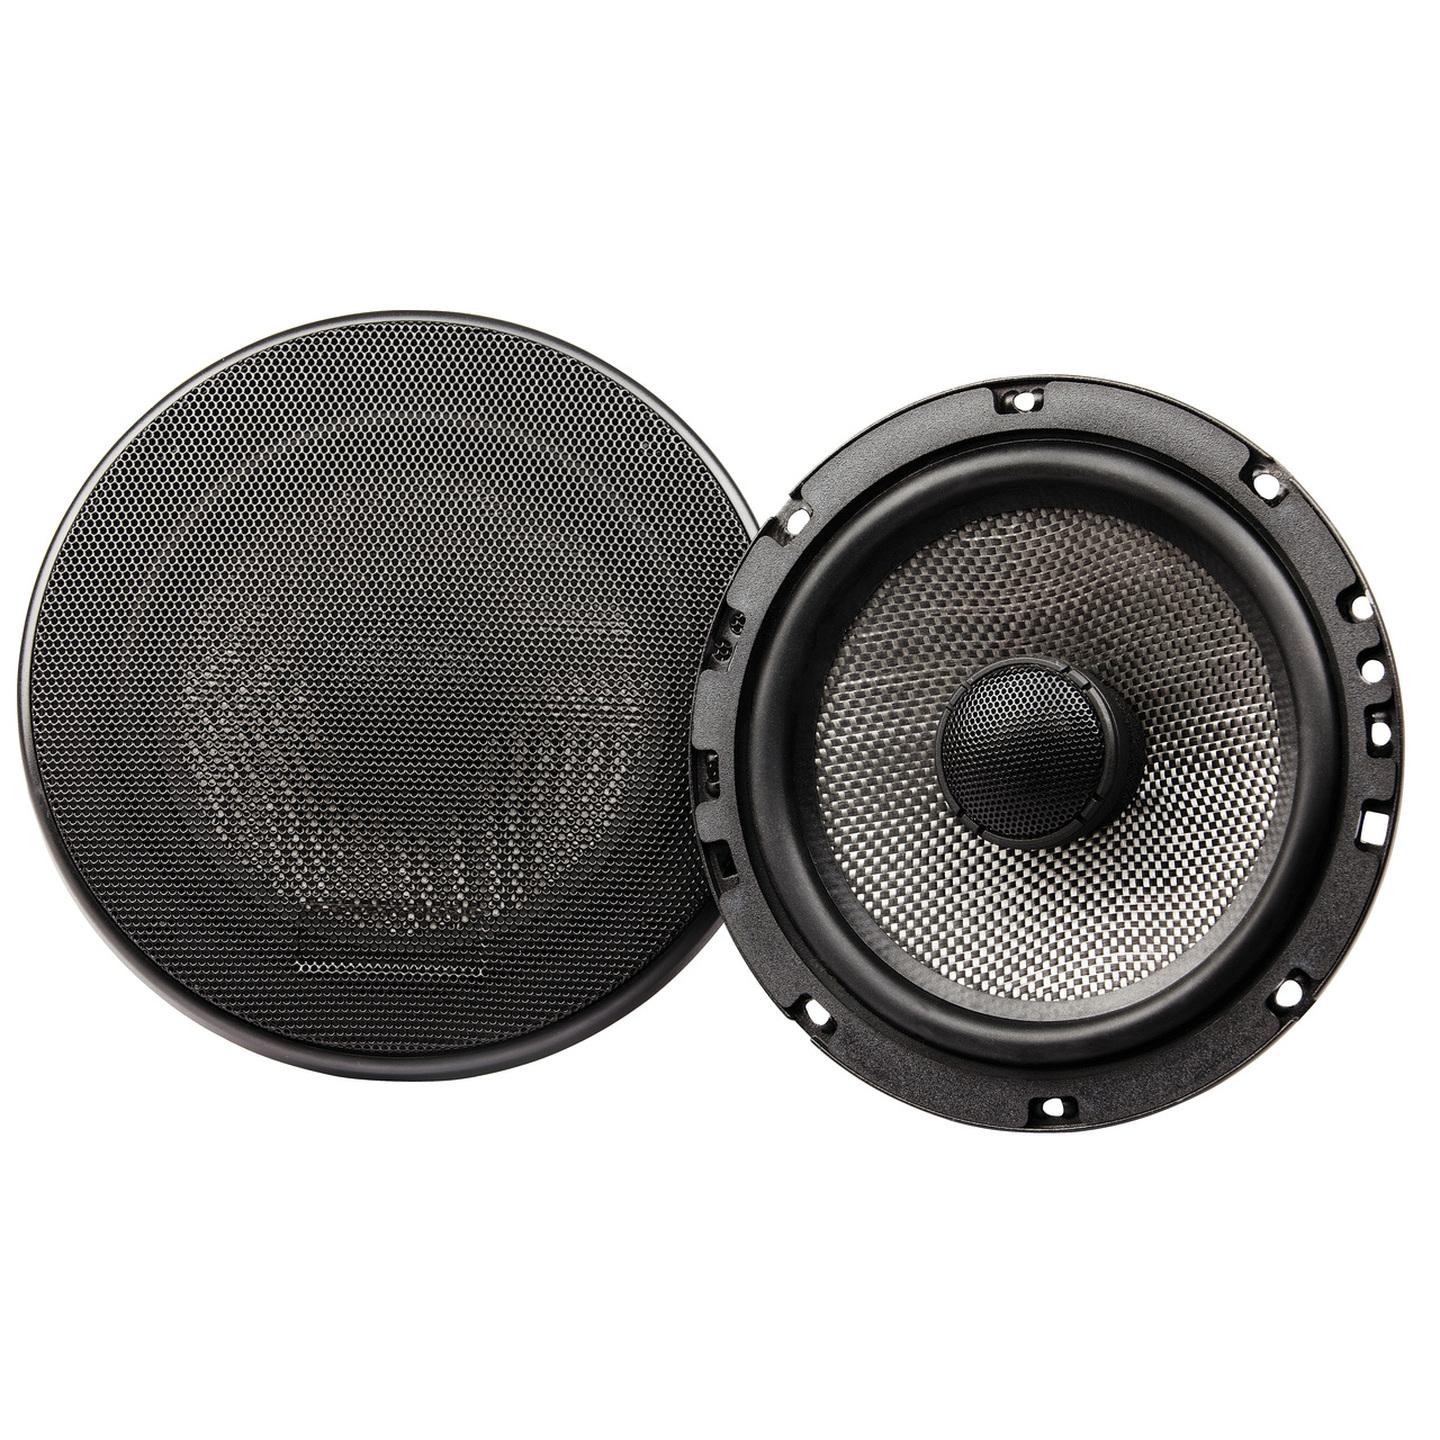 6.5 inch Coaxial Speaker with Silk Dome Tweeter made with Kevlar